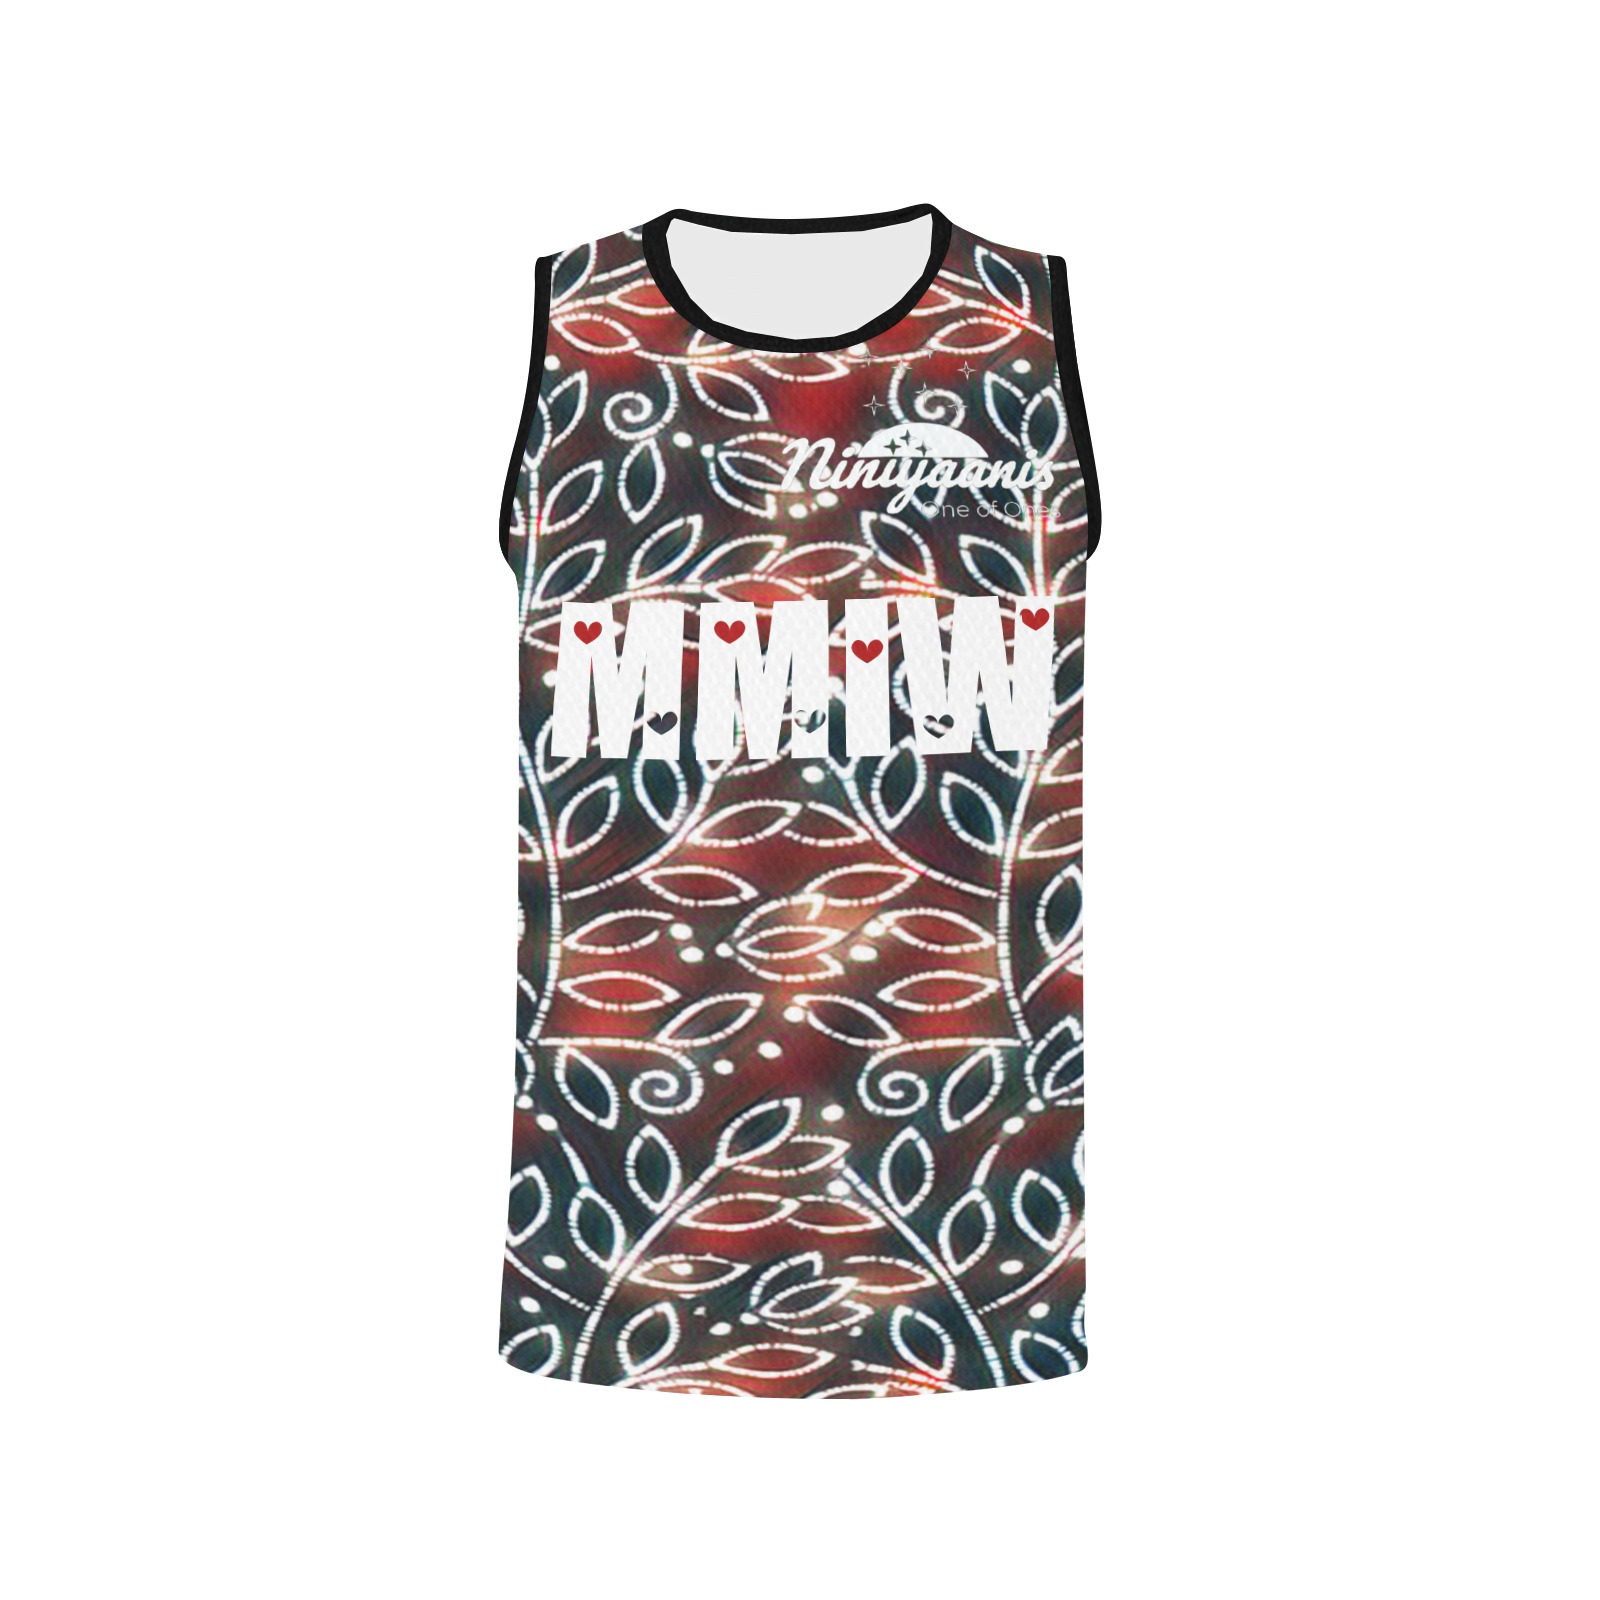 MMIW jersey henry18 All Over Print Basketball Jersey